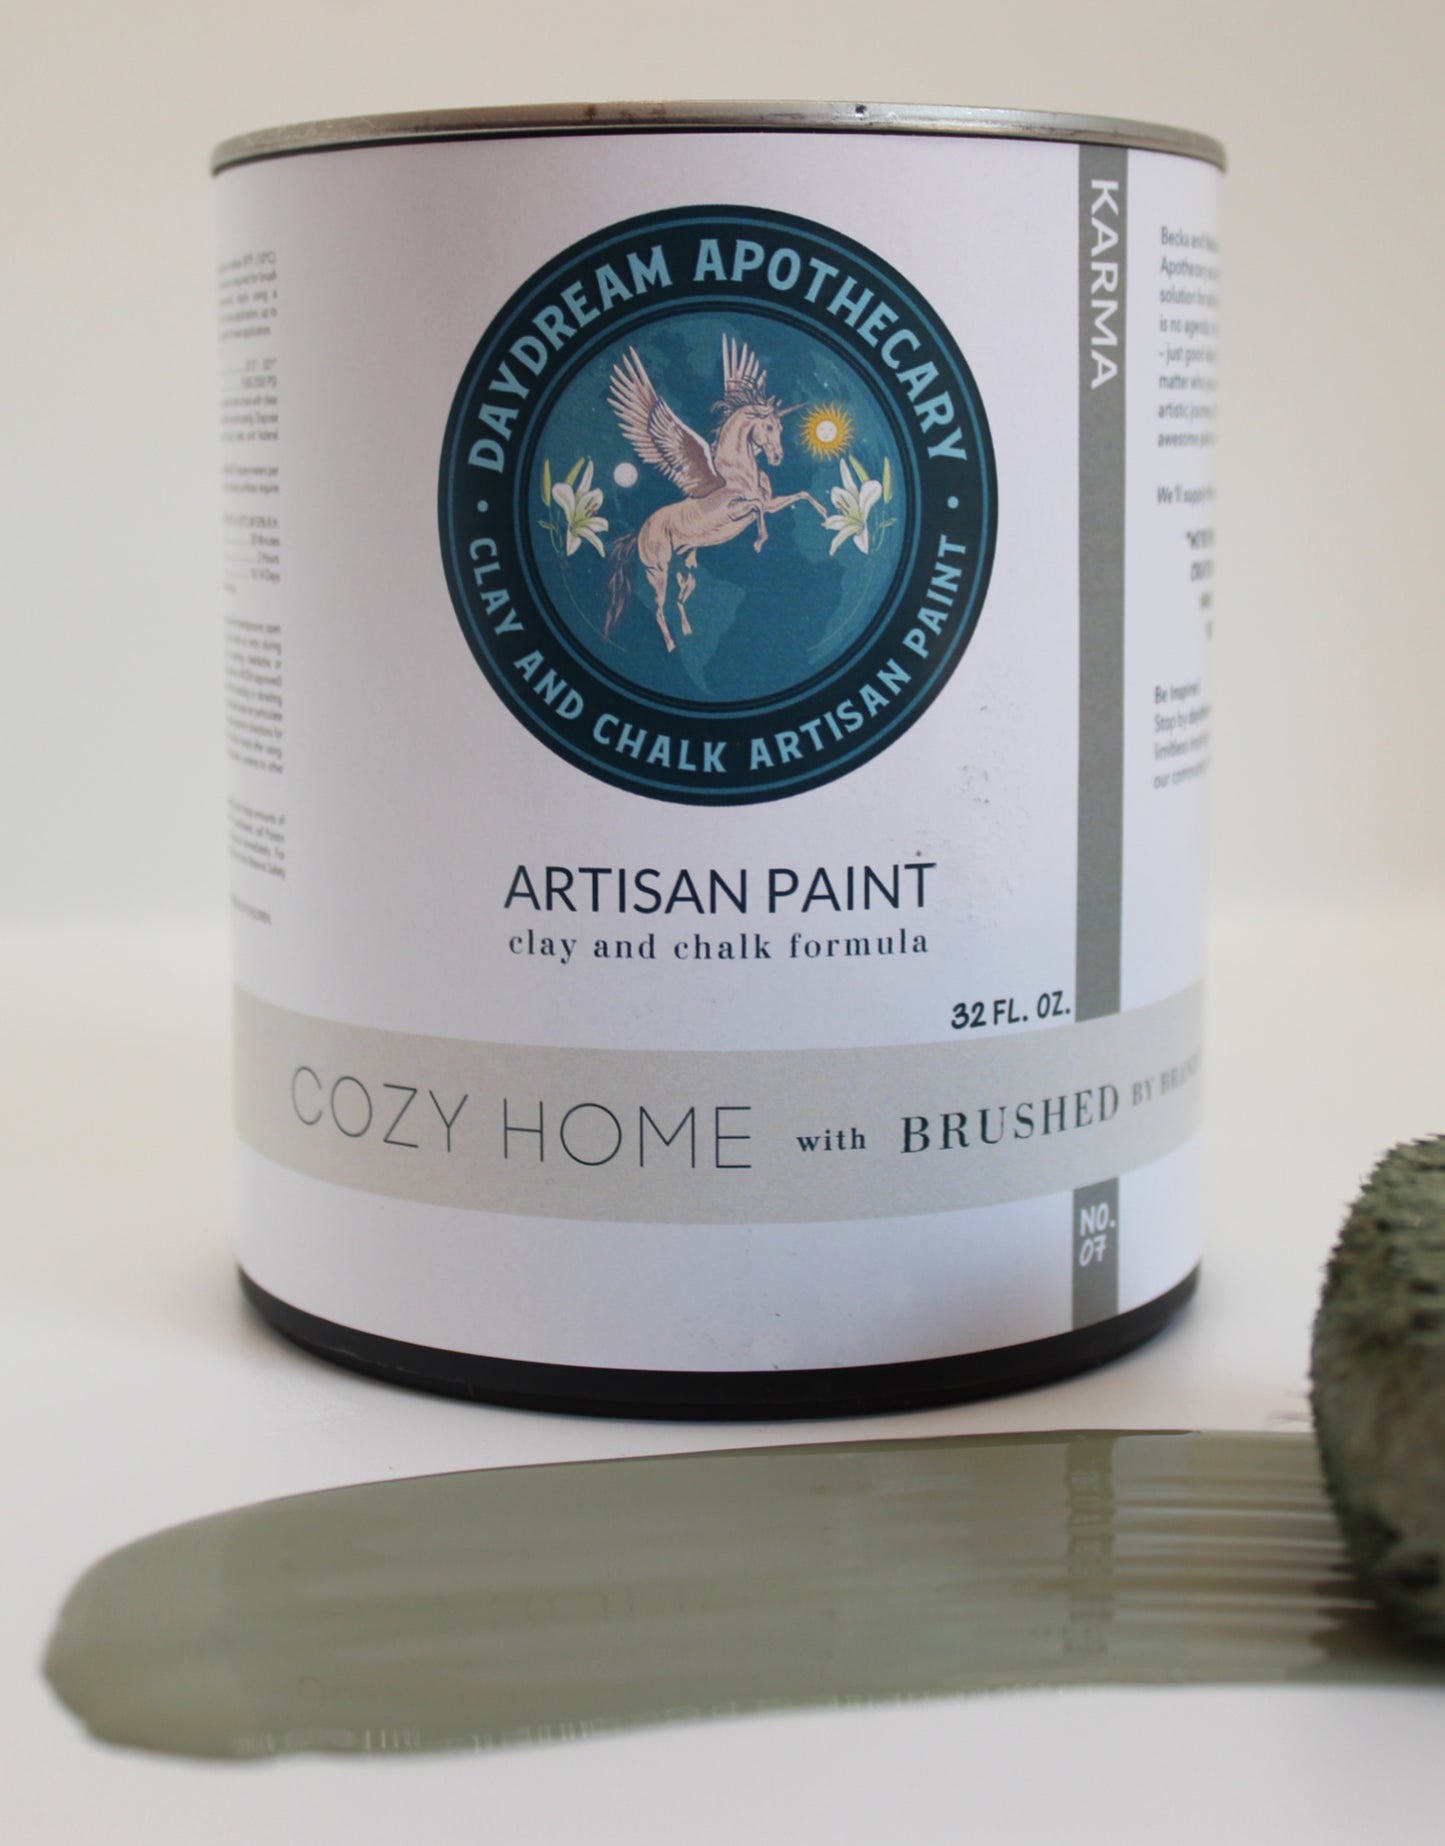 CLOSEOUT SALE! Karma The Vault by Daydream Apothecary Clay and Chalk Artisan Paint